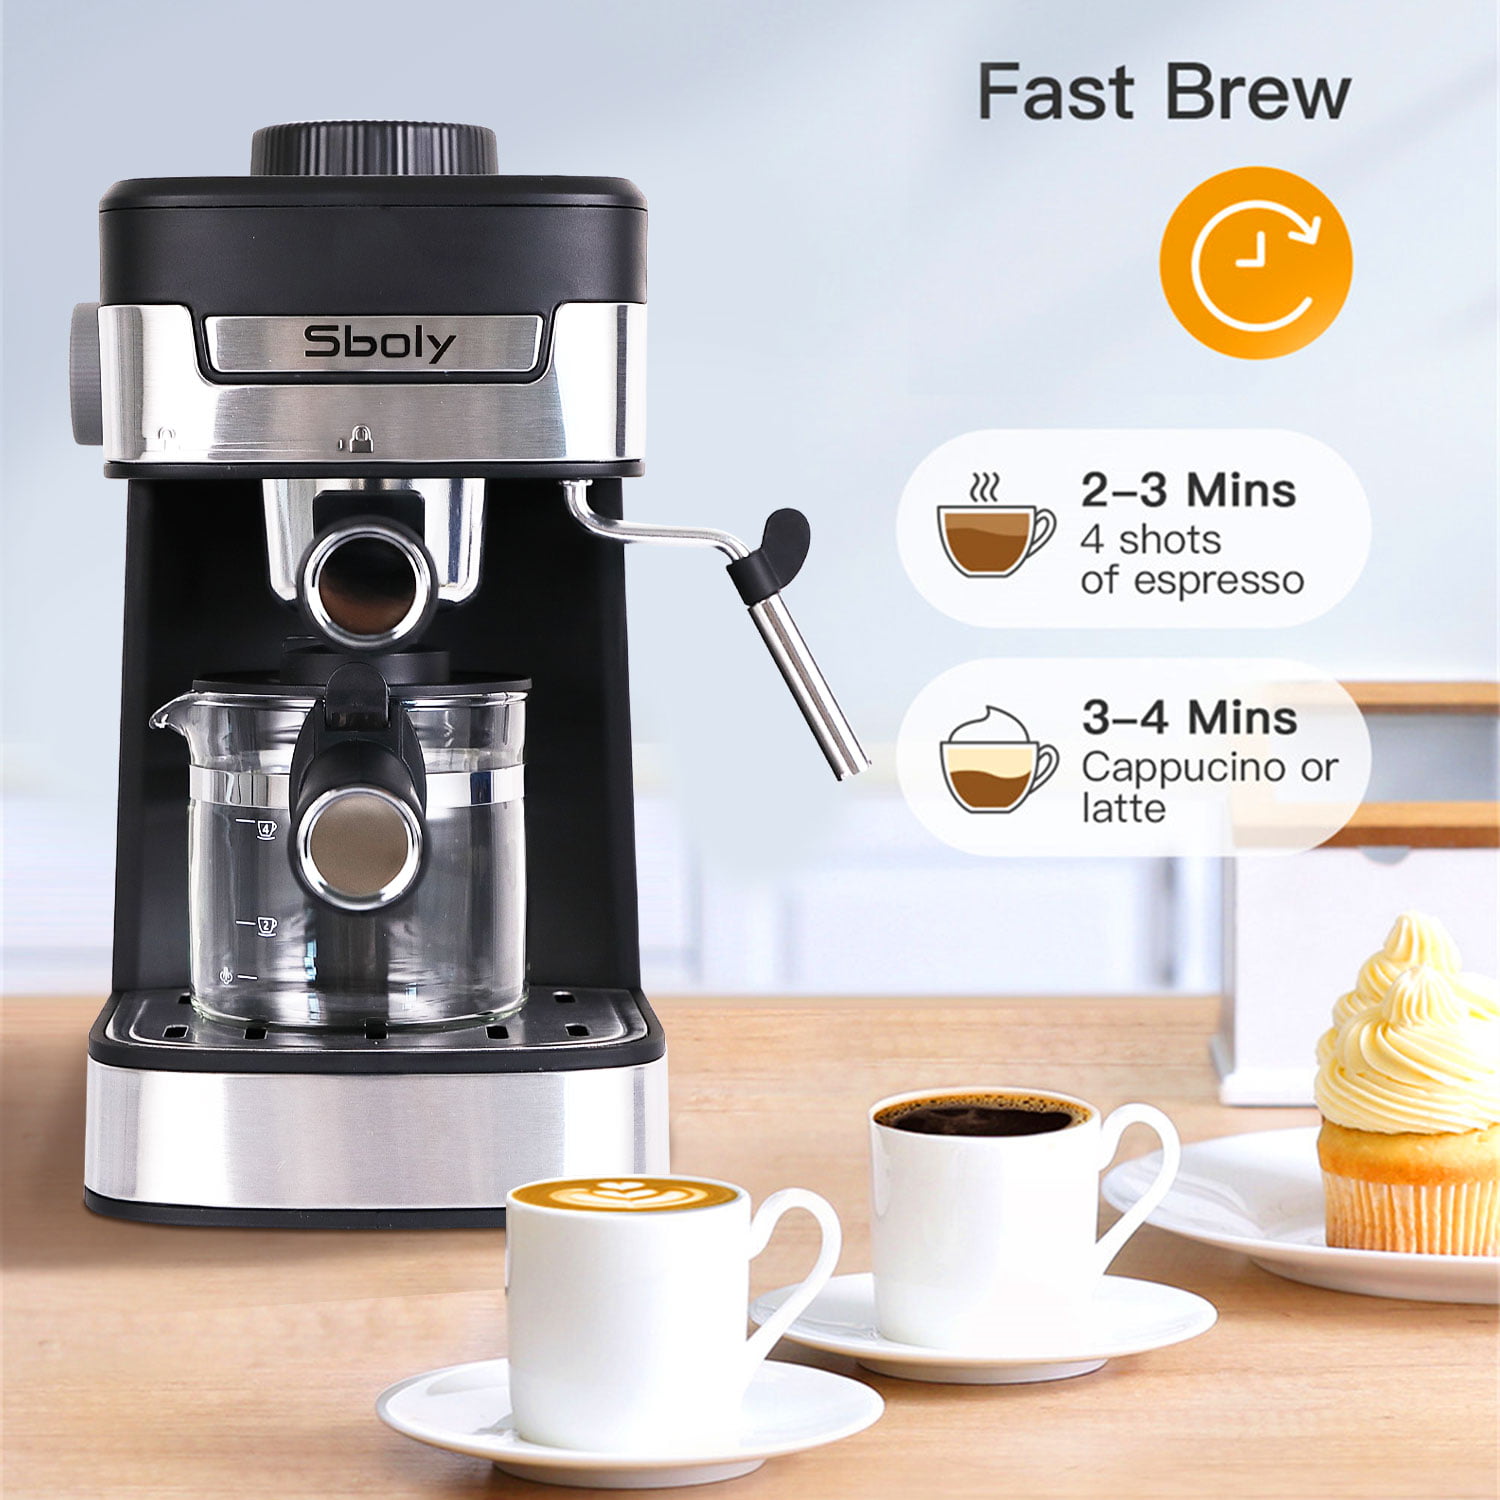 Sboly Single Serve Coffee Maker with Milk Frother , Cappuccino and Latte  Machine , Brew Size 6-14oz , Black